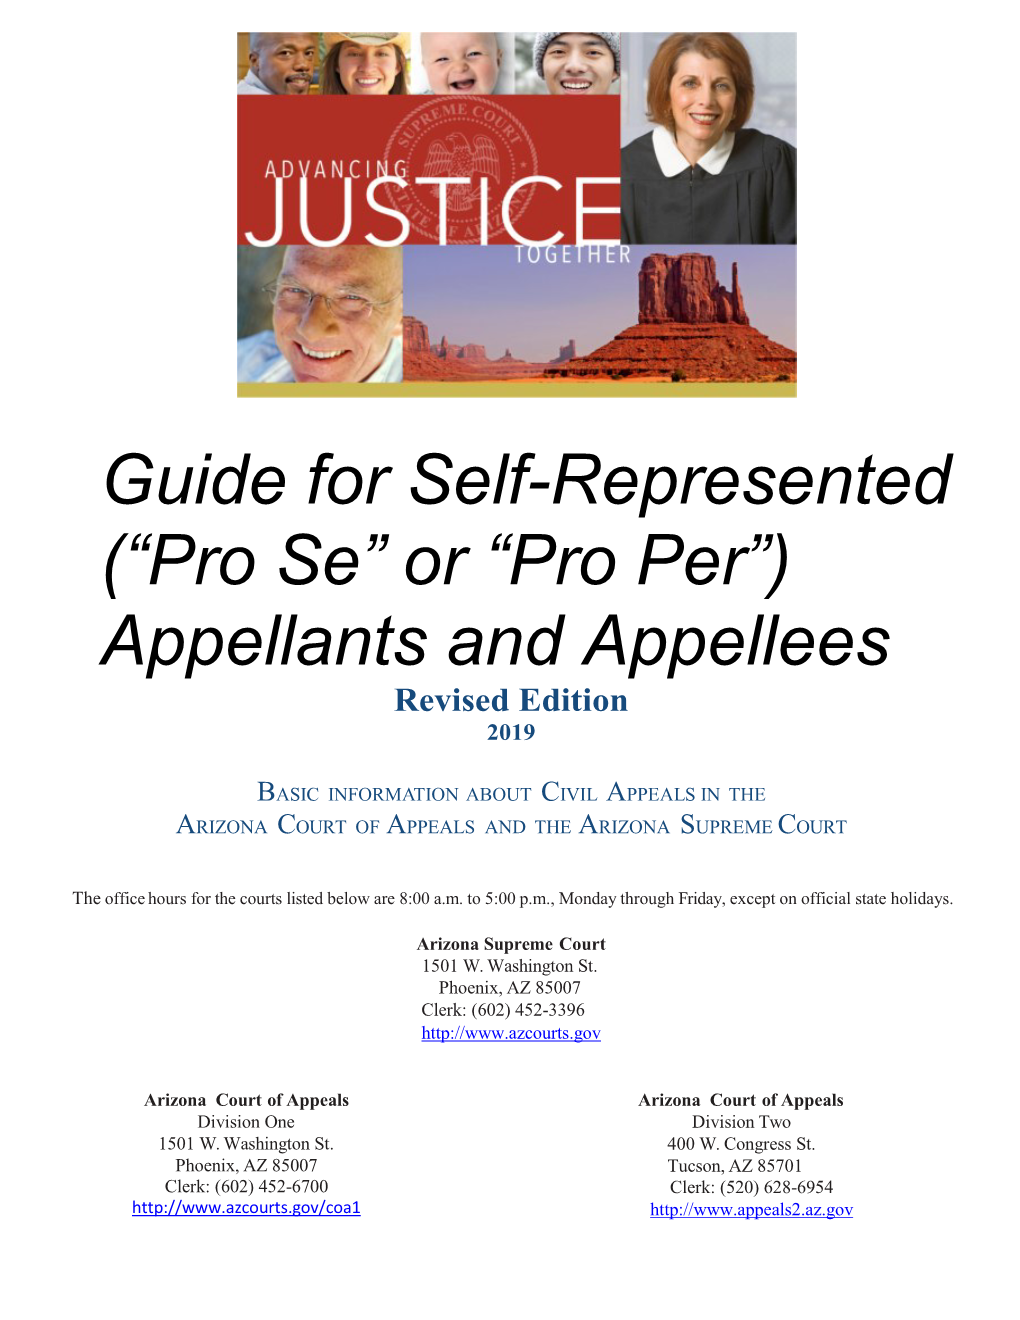 Guide for Self-Represented (“Pro Se” Or “Pro Per”) Appellants and Appellees Revised Edition 2019